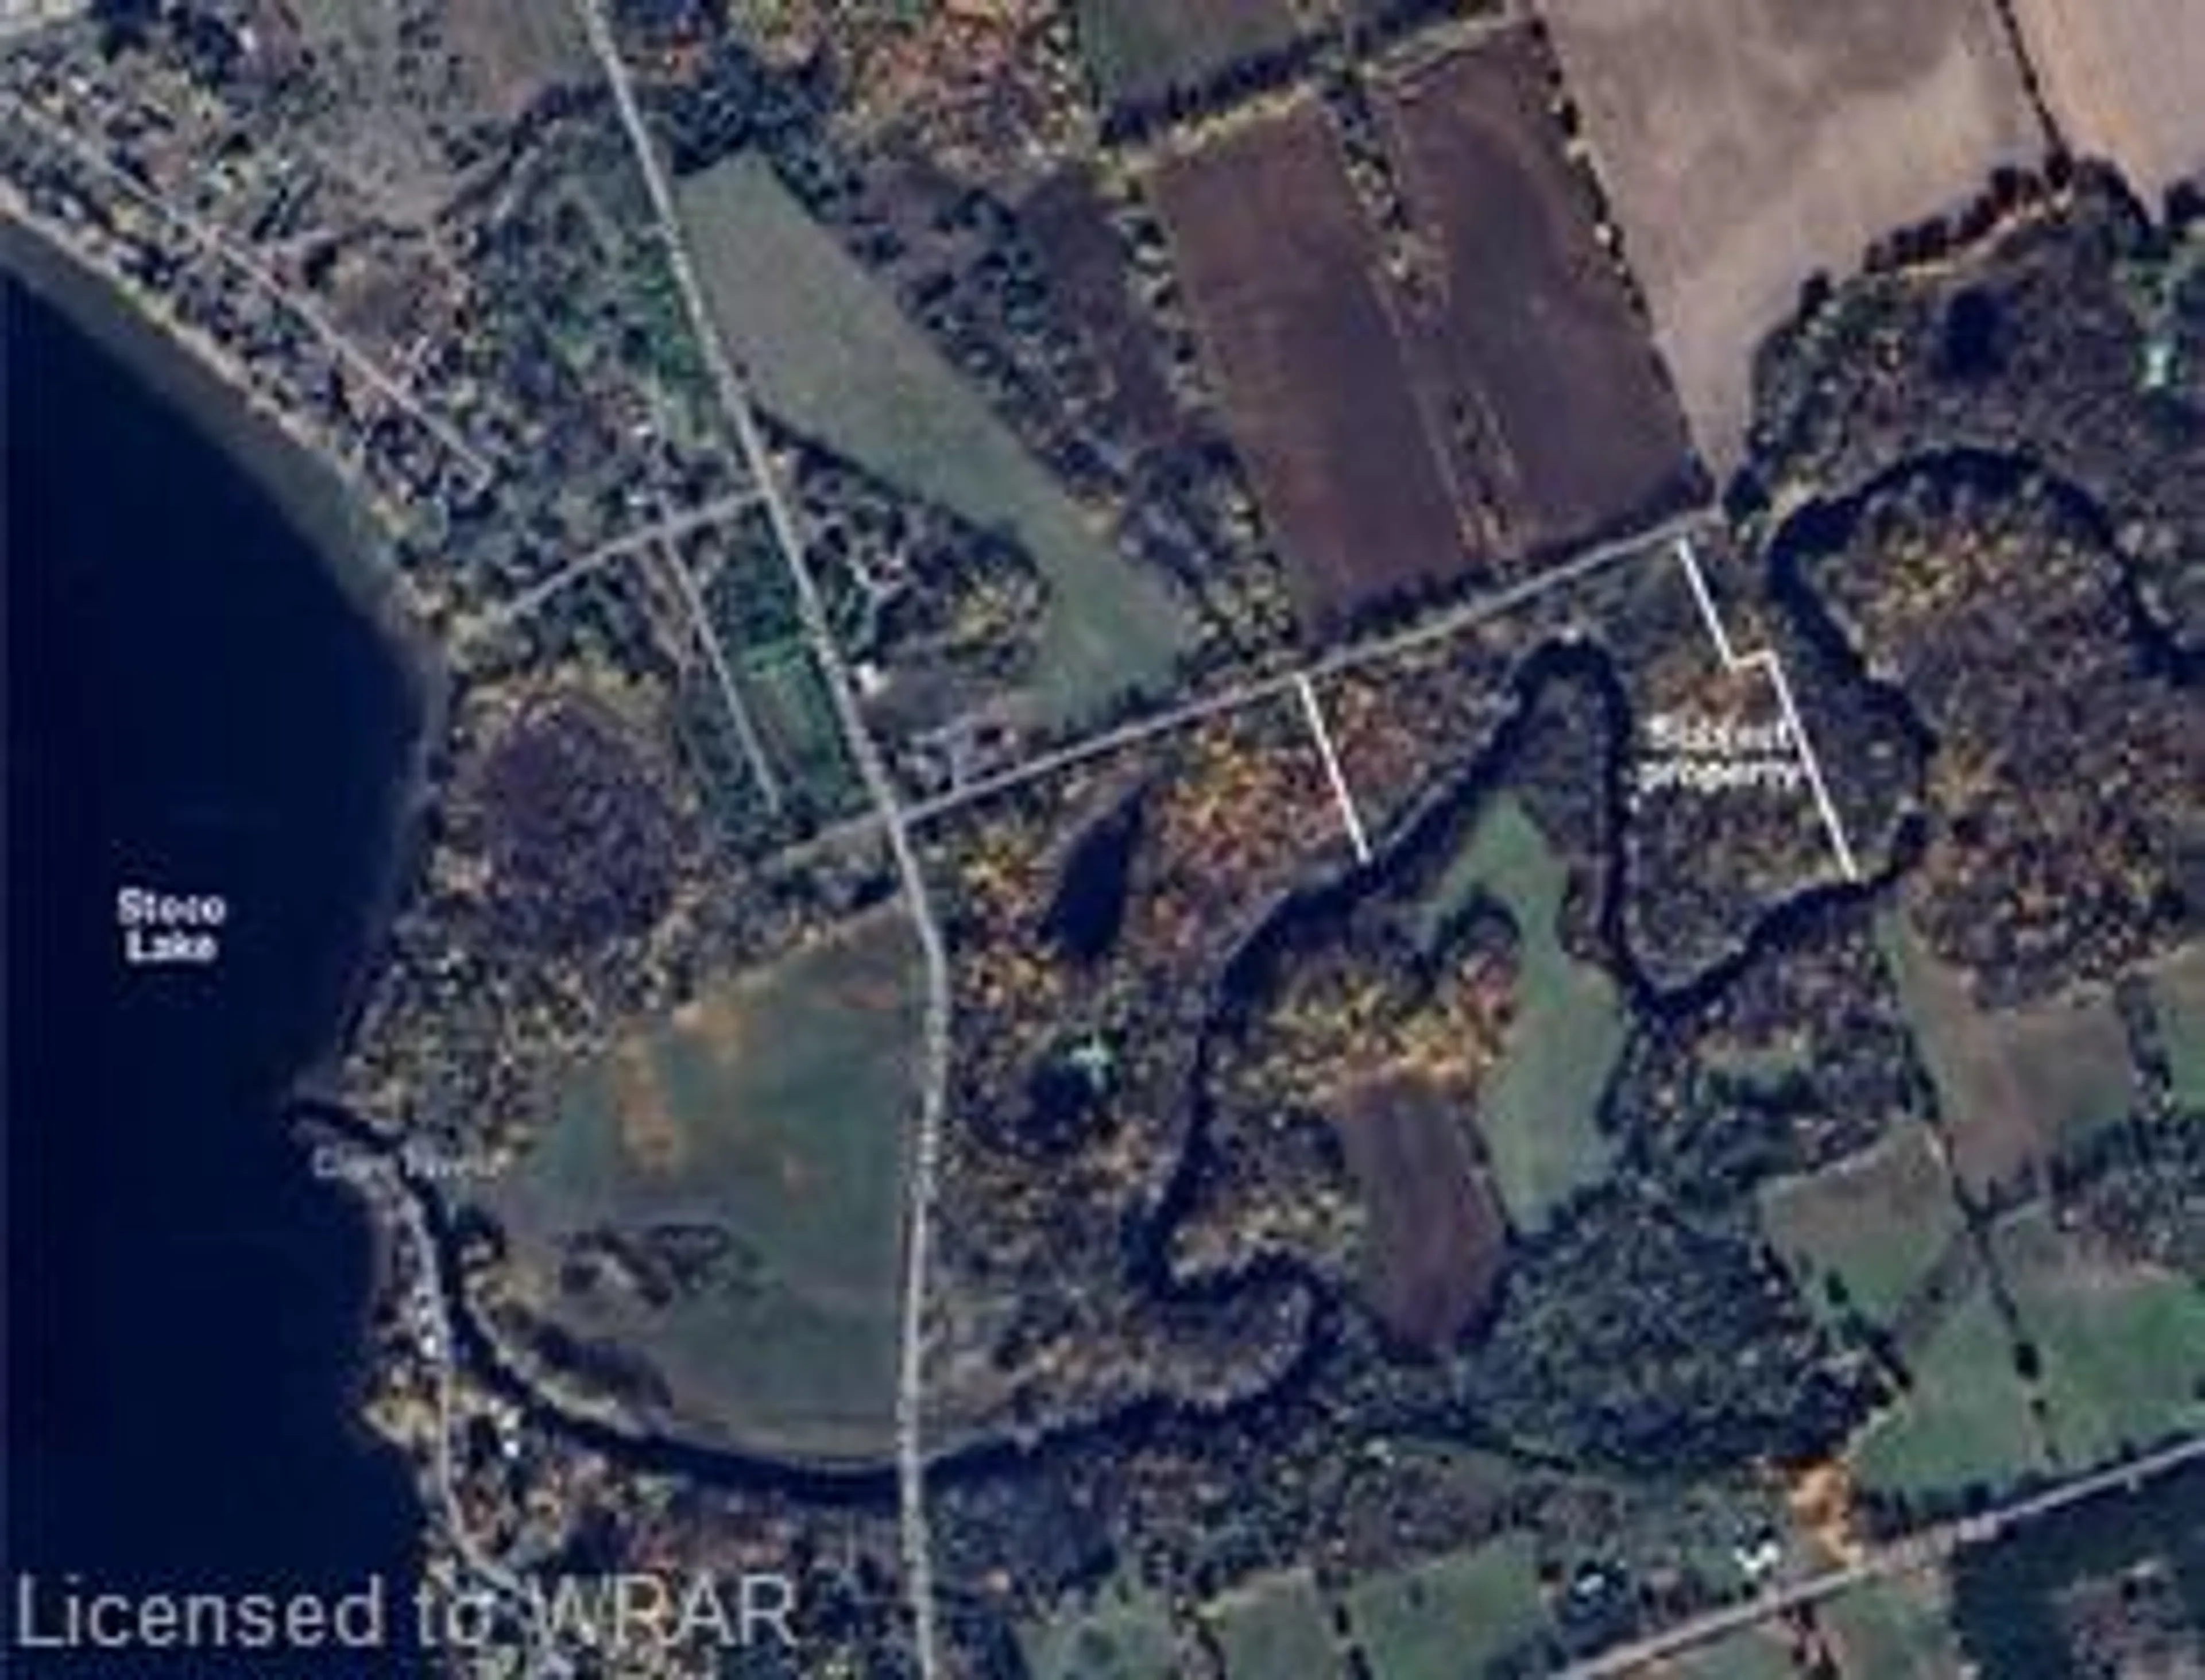 Lakeview for LOT 17 Concession 9, Hastings Ontario K0L 1Y0